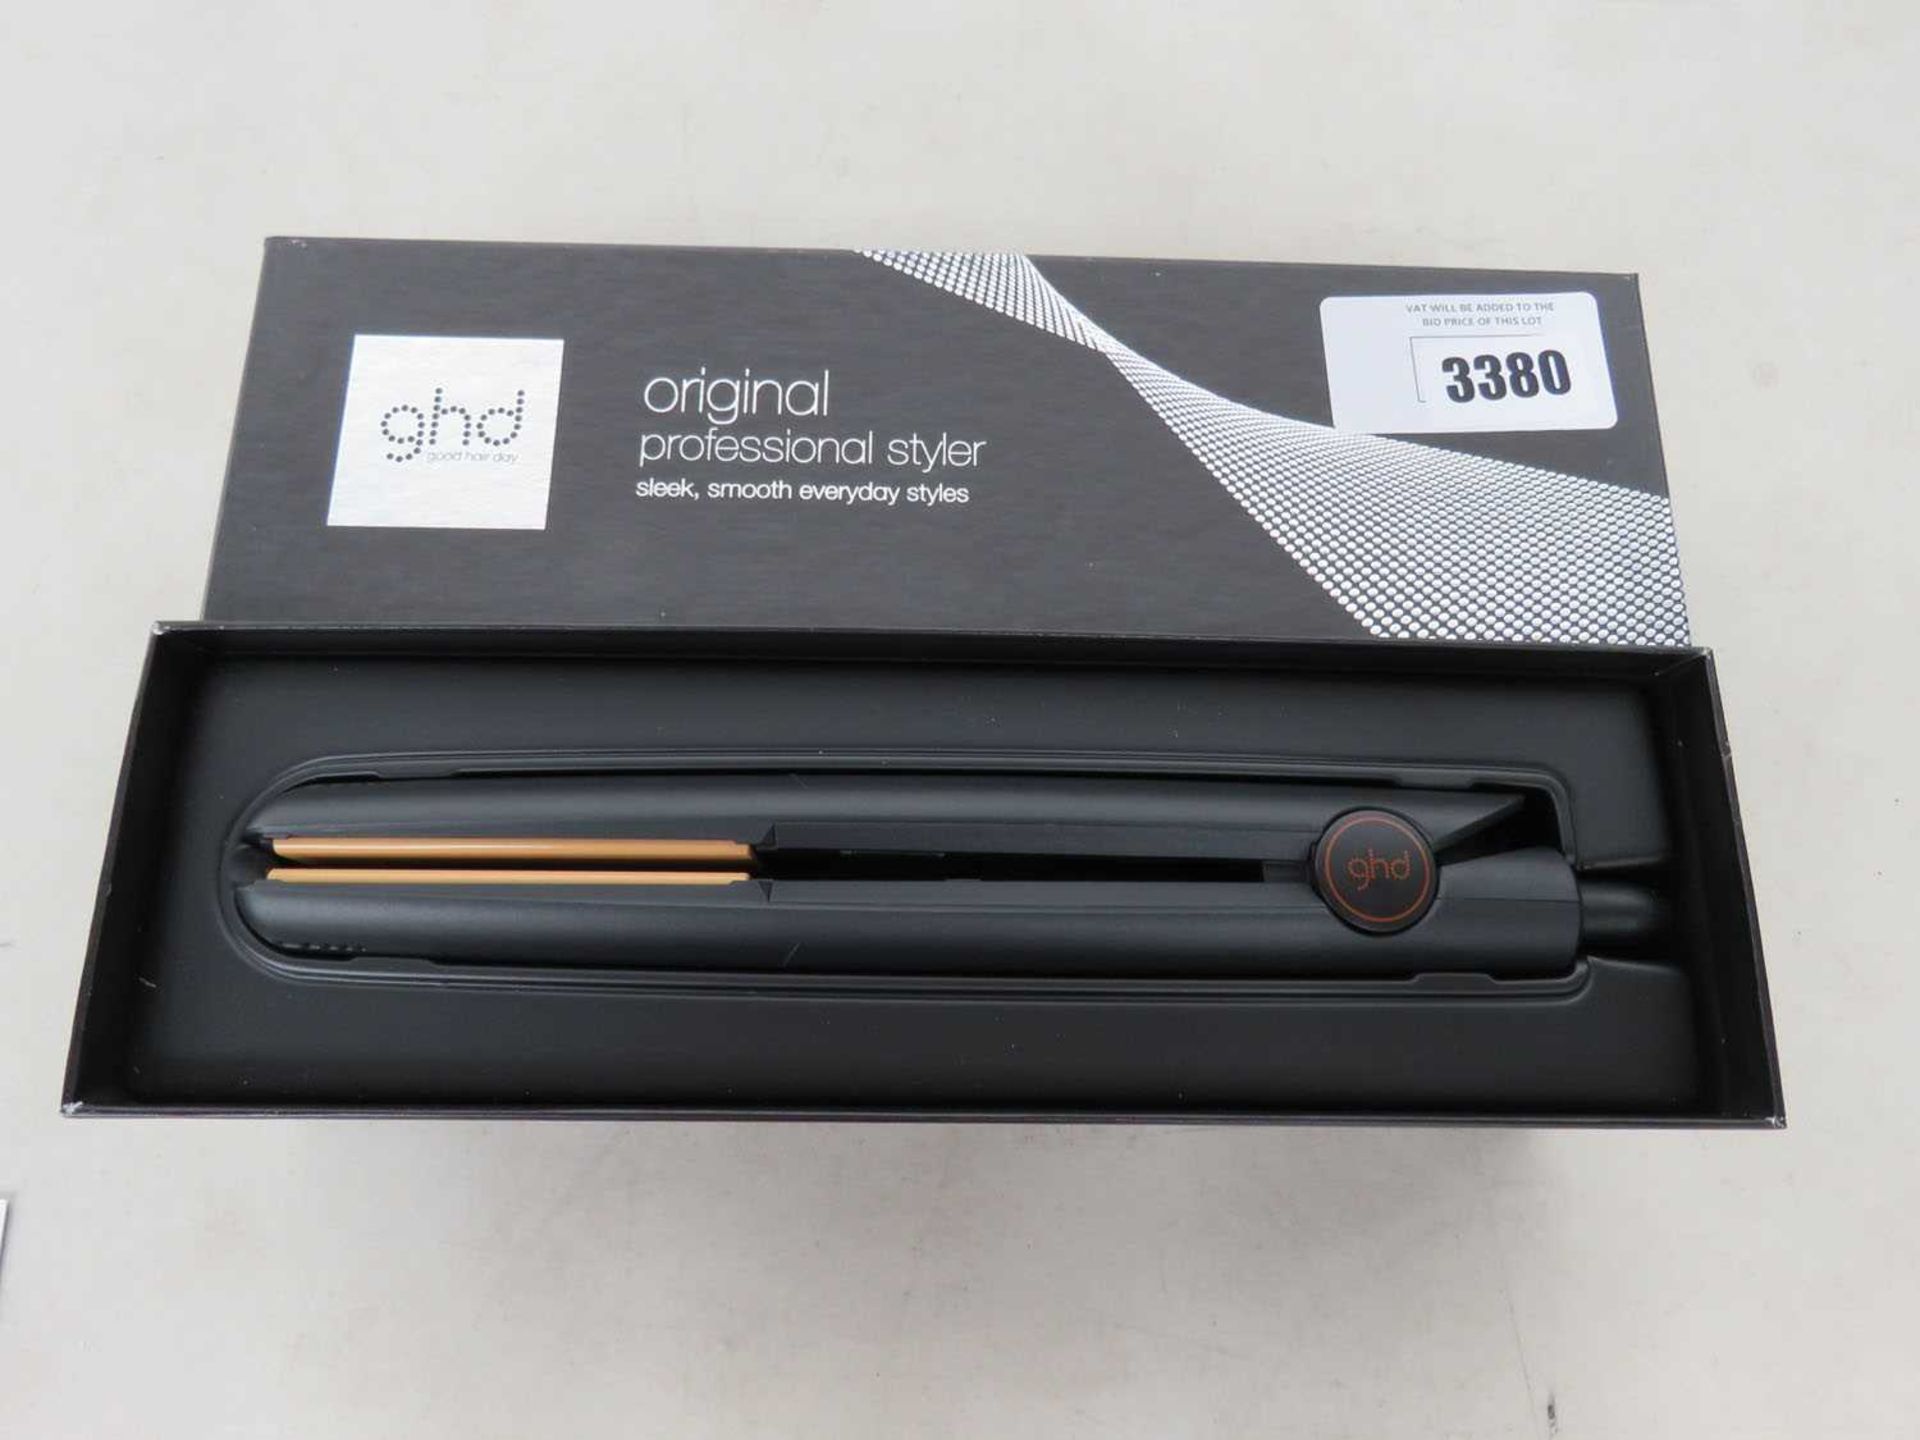 +VAT GHD Original professional stylers with box